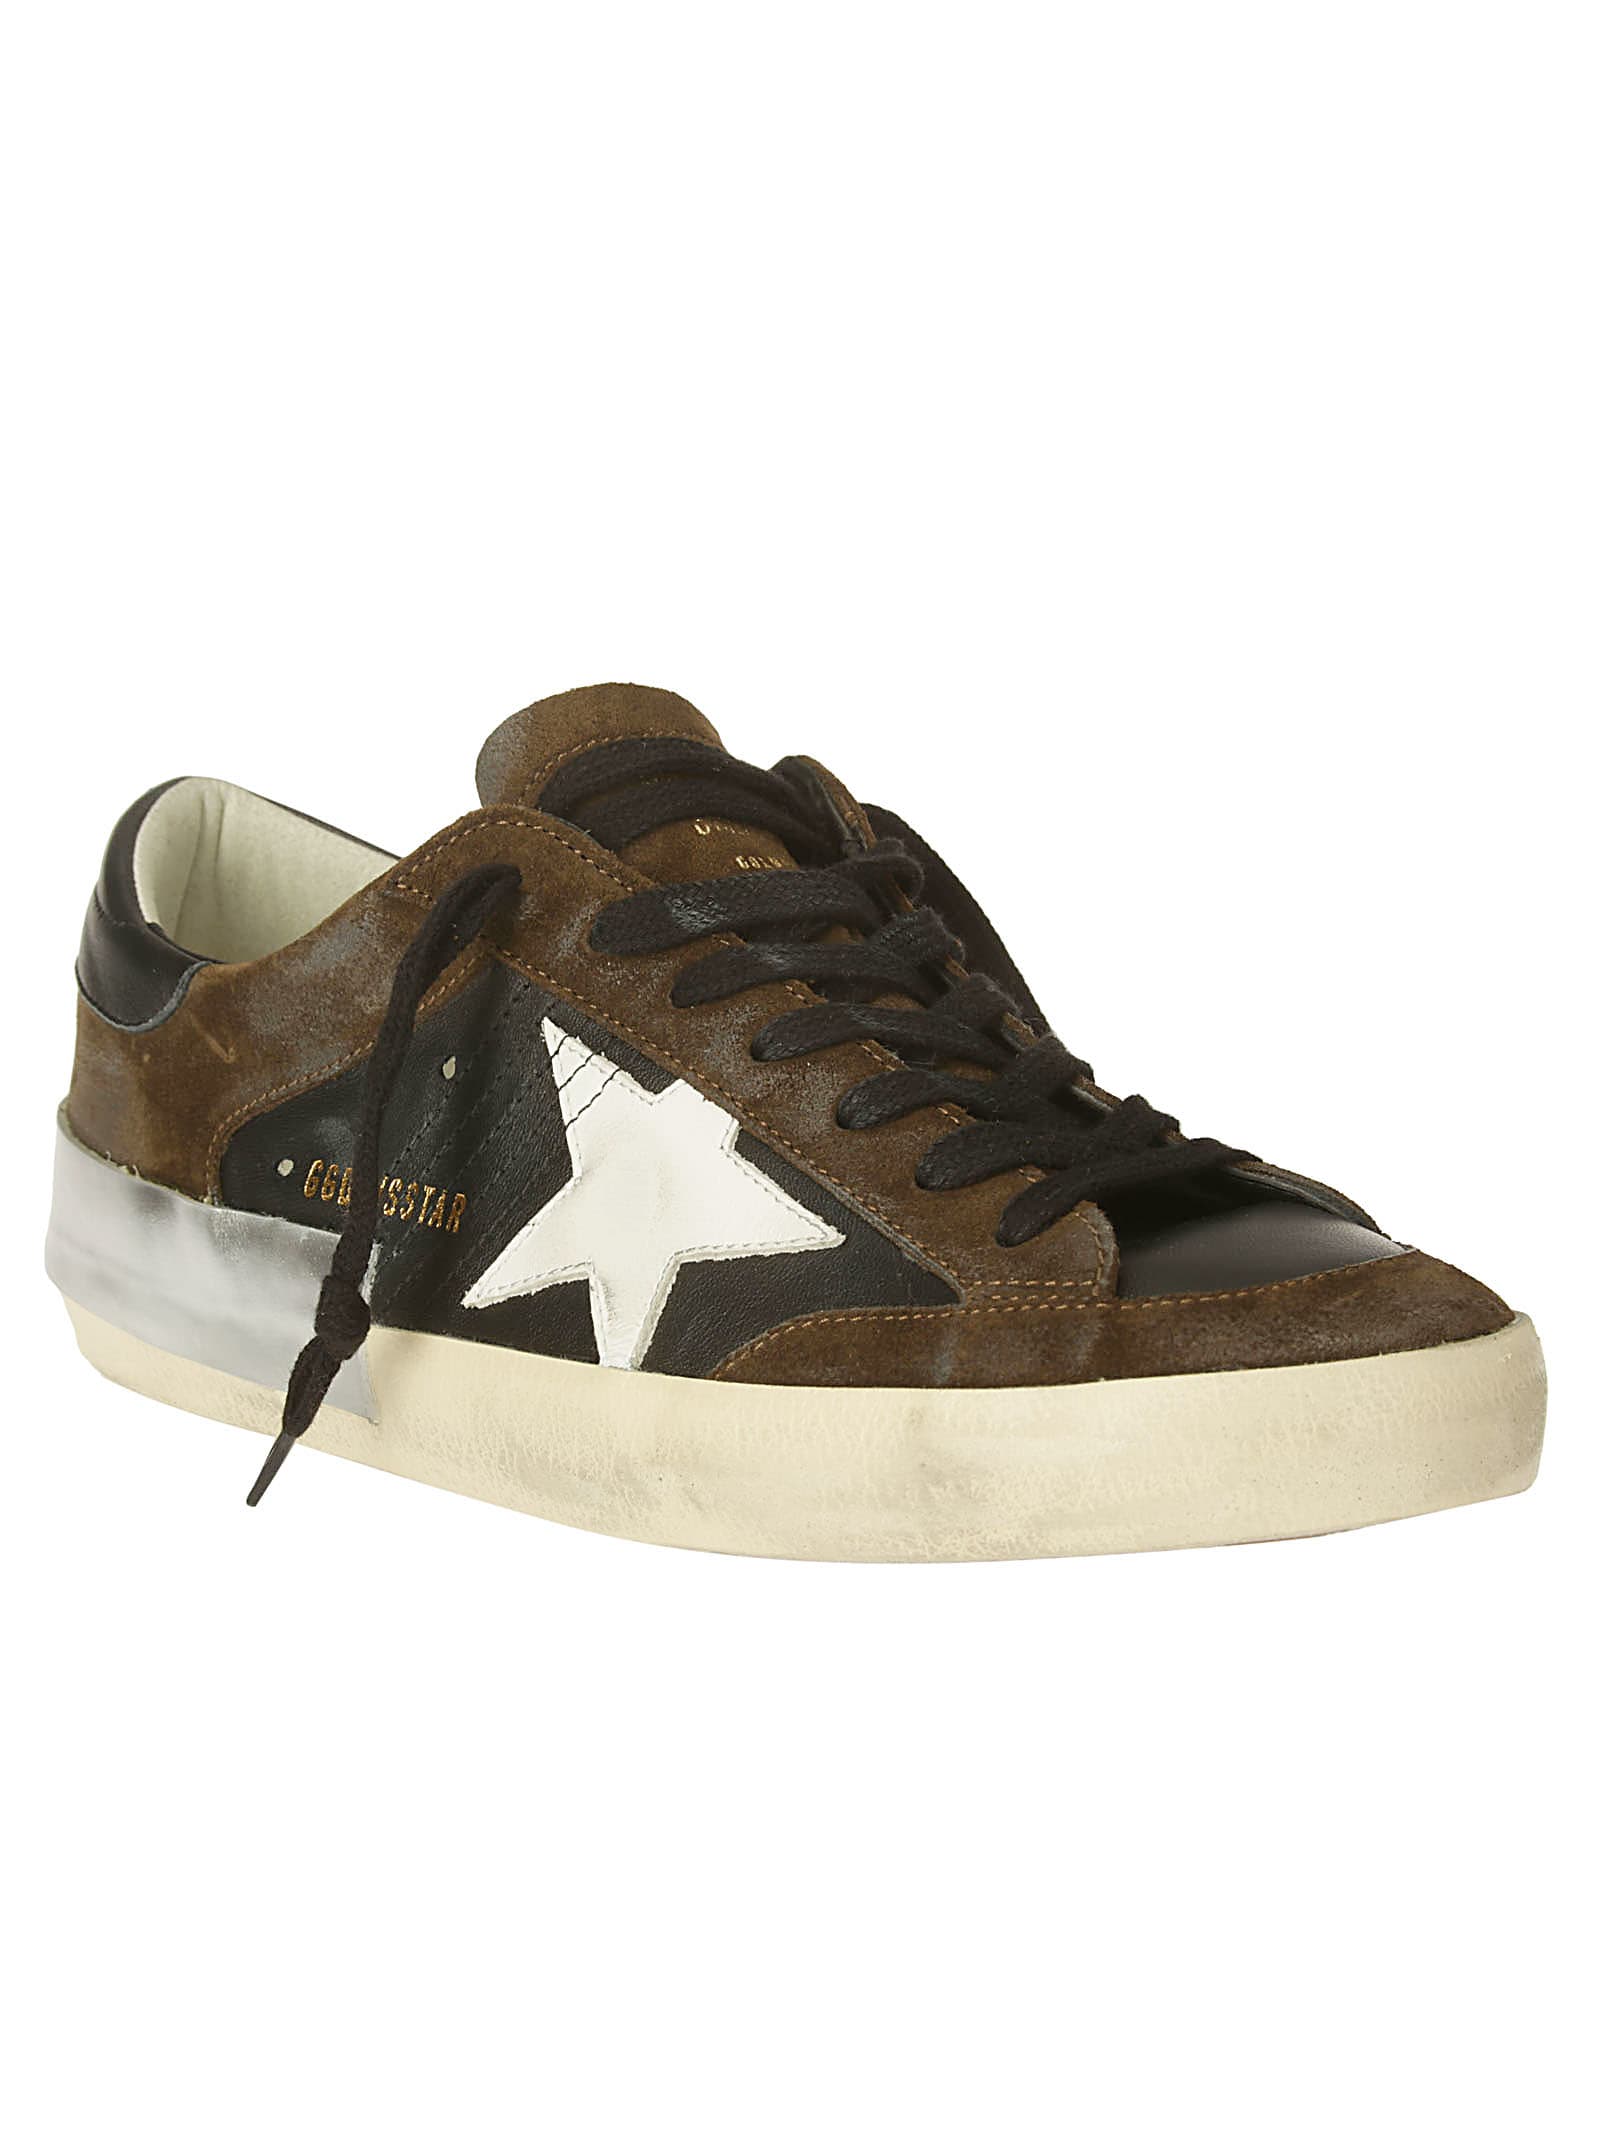 Shop Golden Goose Super-star Nappa And Suede Upper Leather Star Napp In Black/brown/white